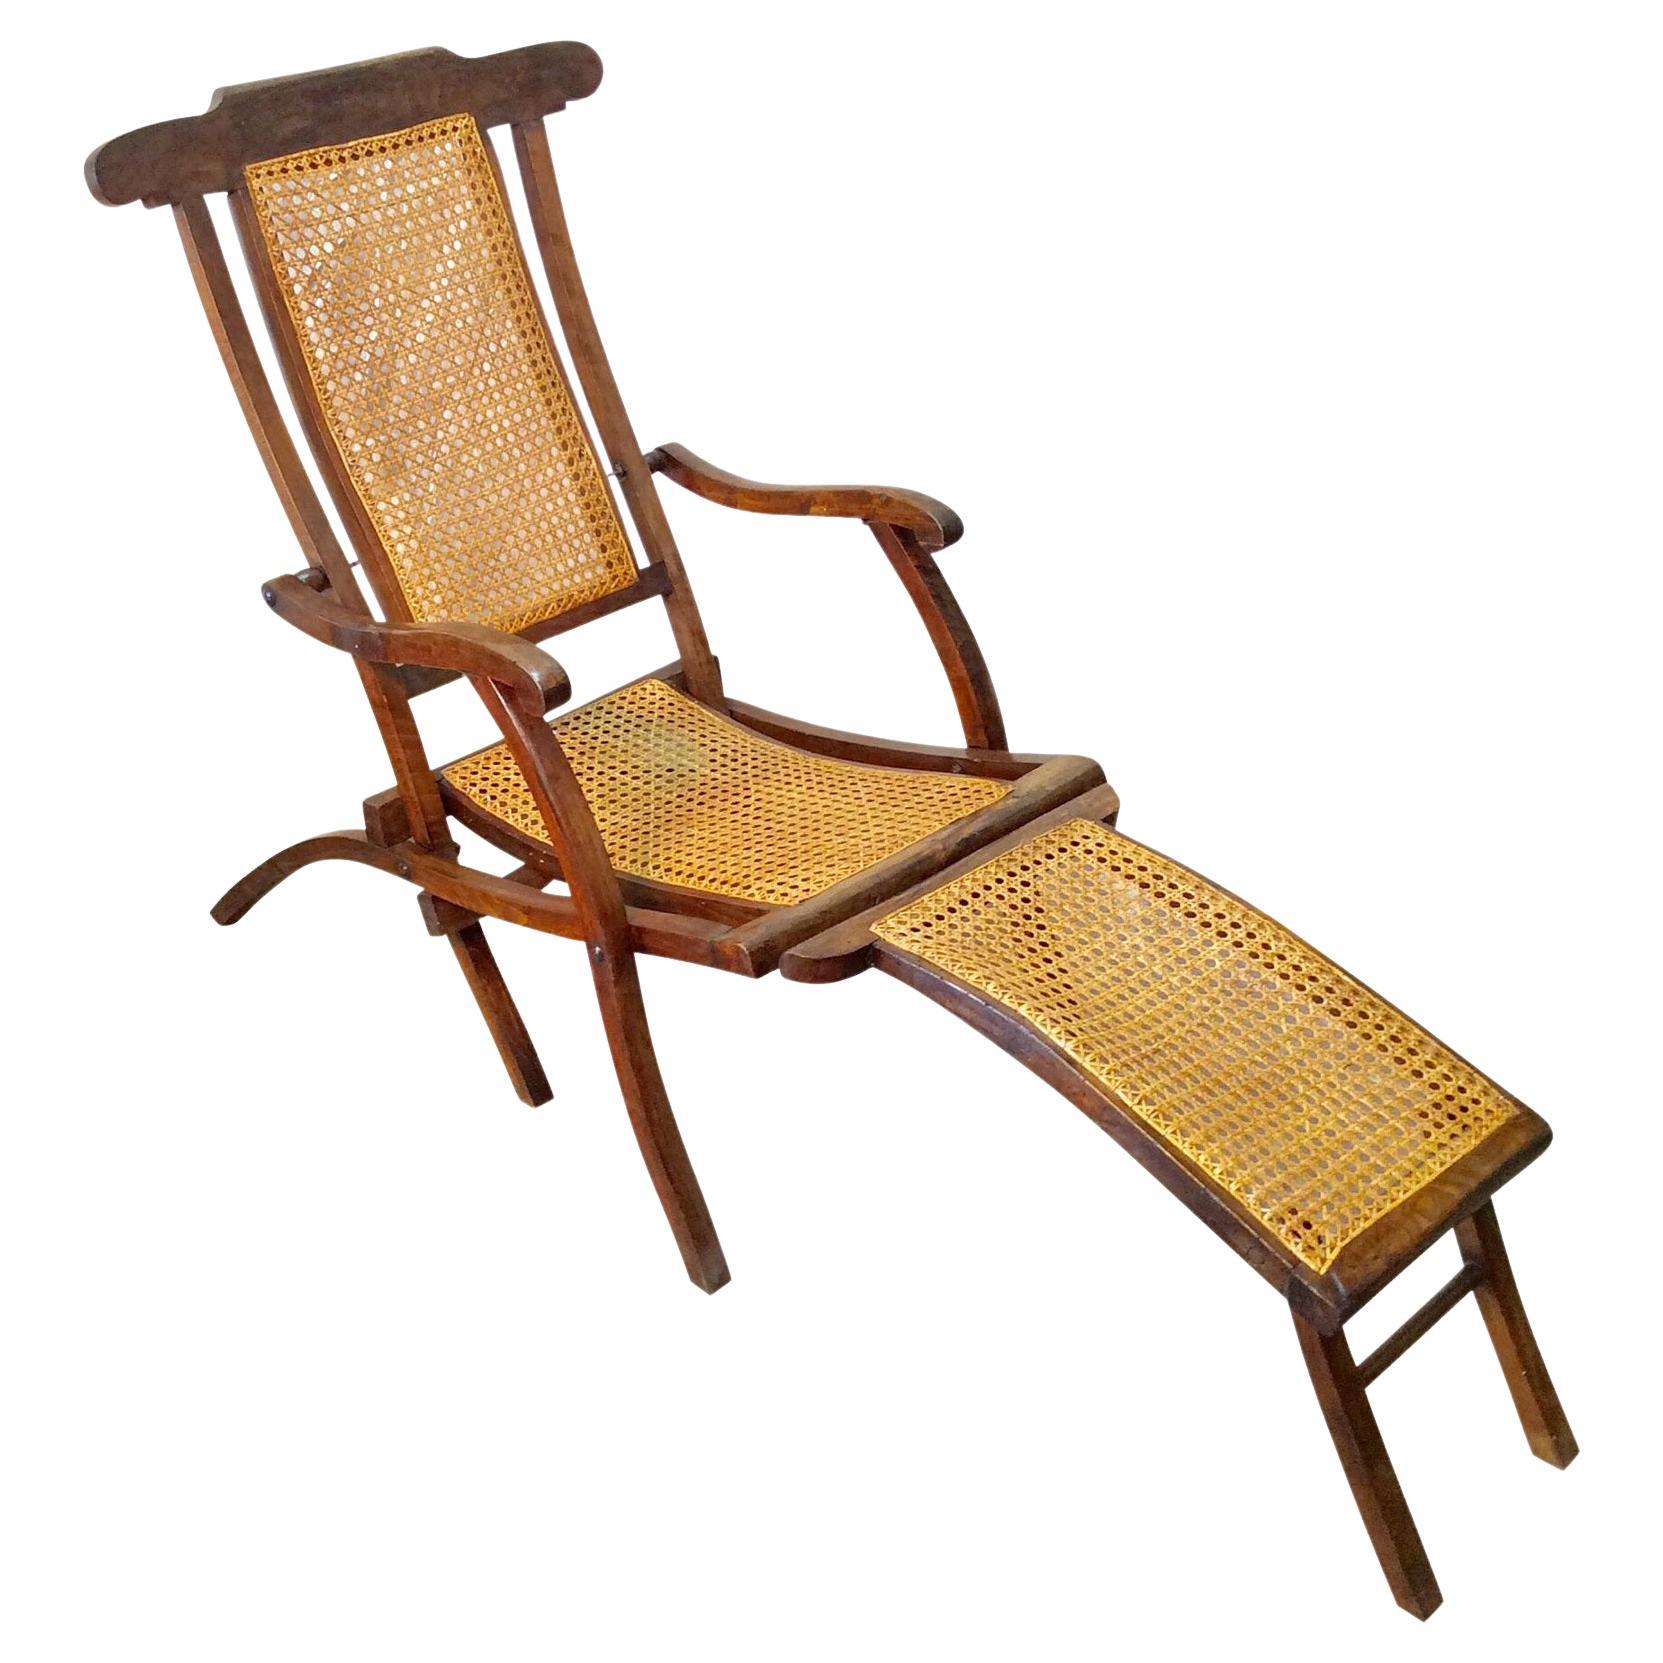 Early 20th Century French Walnut and Cane Steamer Deck Chair For Sale